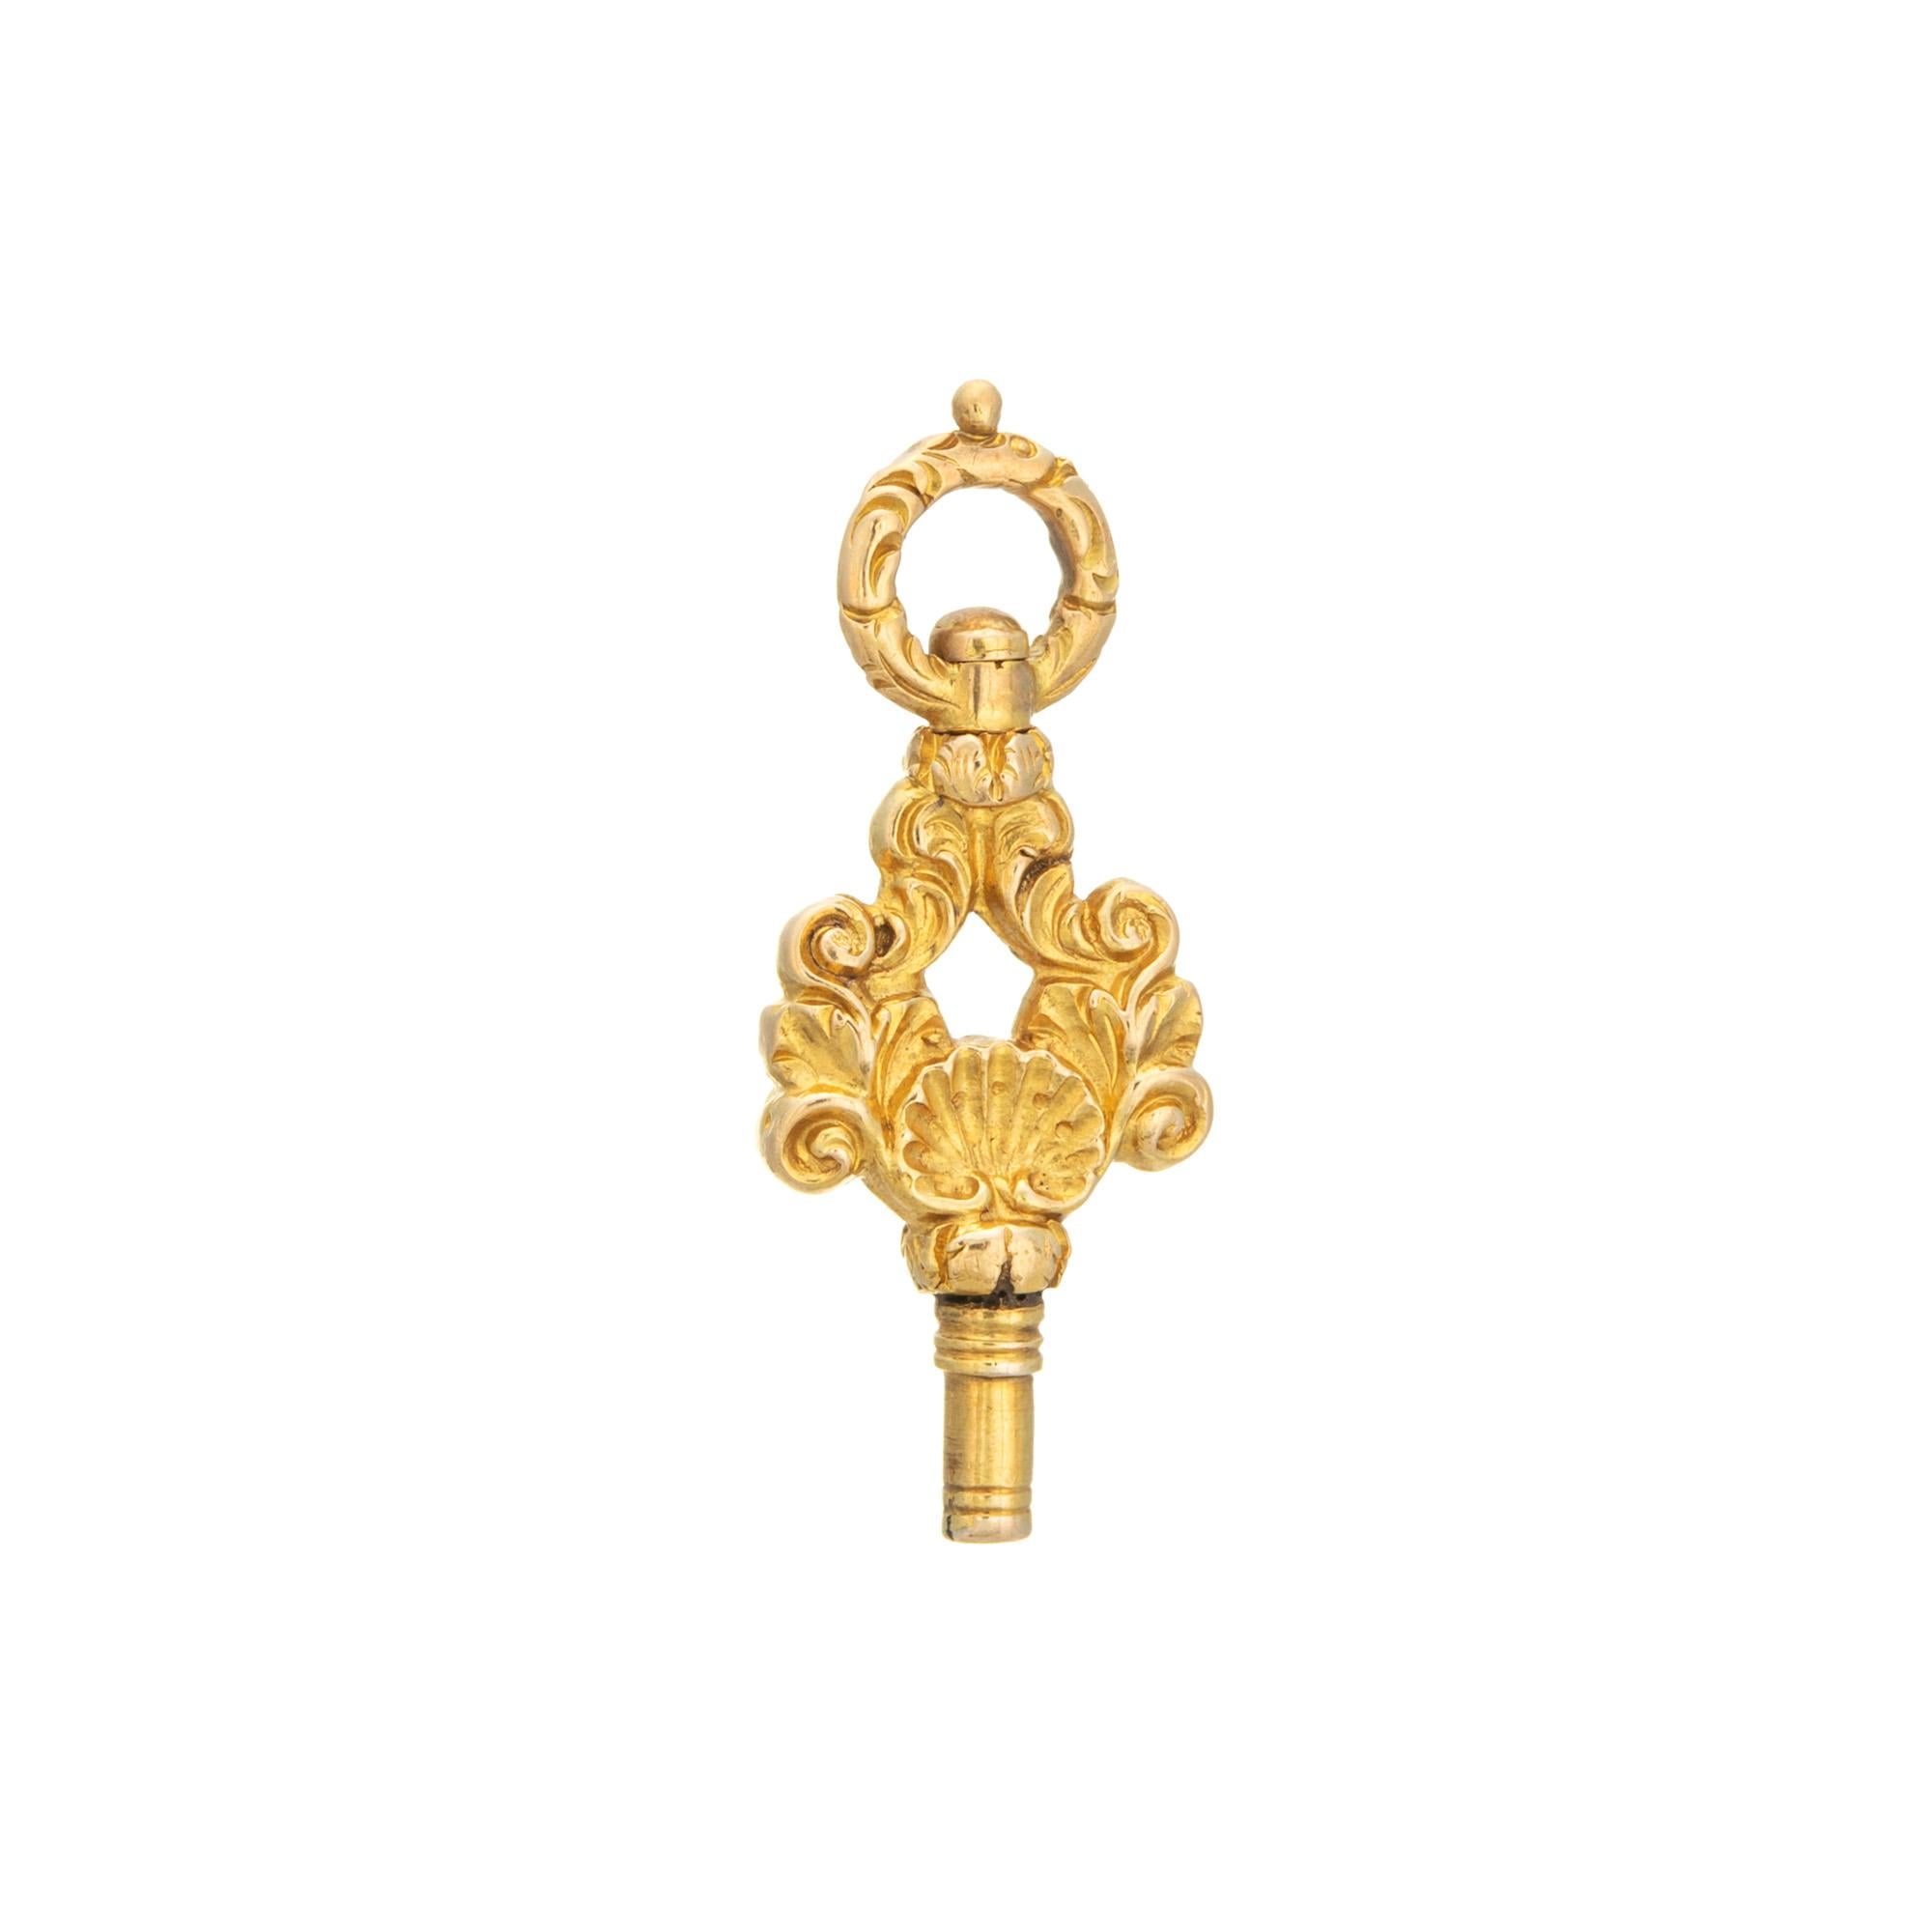 Finely detailed antique Mid-Victorian fob (circa 1860s to 1870s) crafted in 18 karat yellow gold. 

The beautifully detailed antique watch key fob was originally worn by a gentleman with a pocket watch. The key would have wound the movement of the